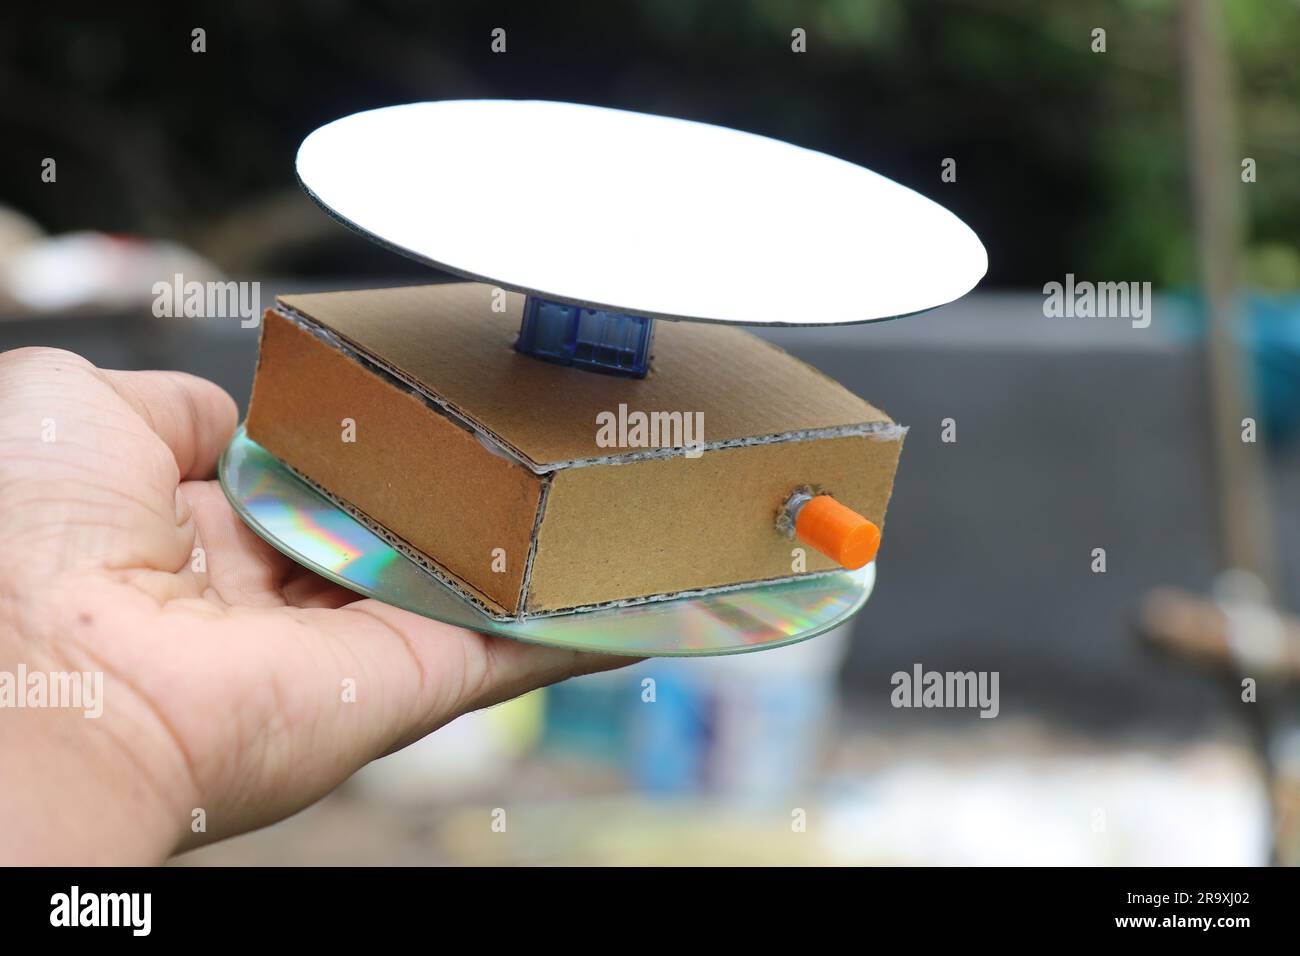 Small motorized turntable used to capture videos and photos of the objects  held in the hand. Rotating display stand Stock Photo - Alamy